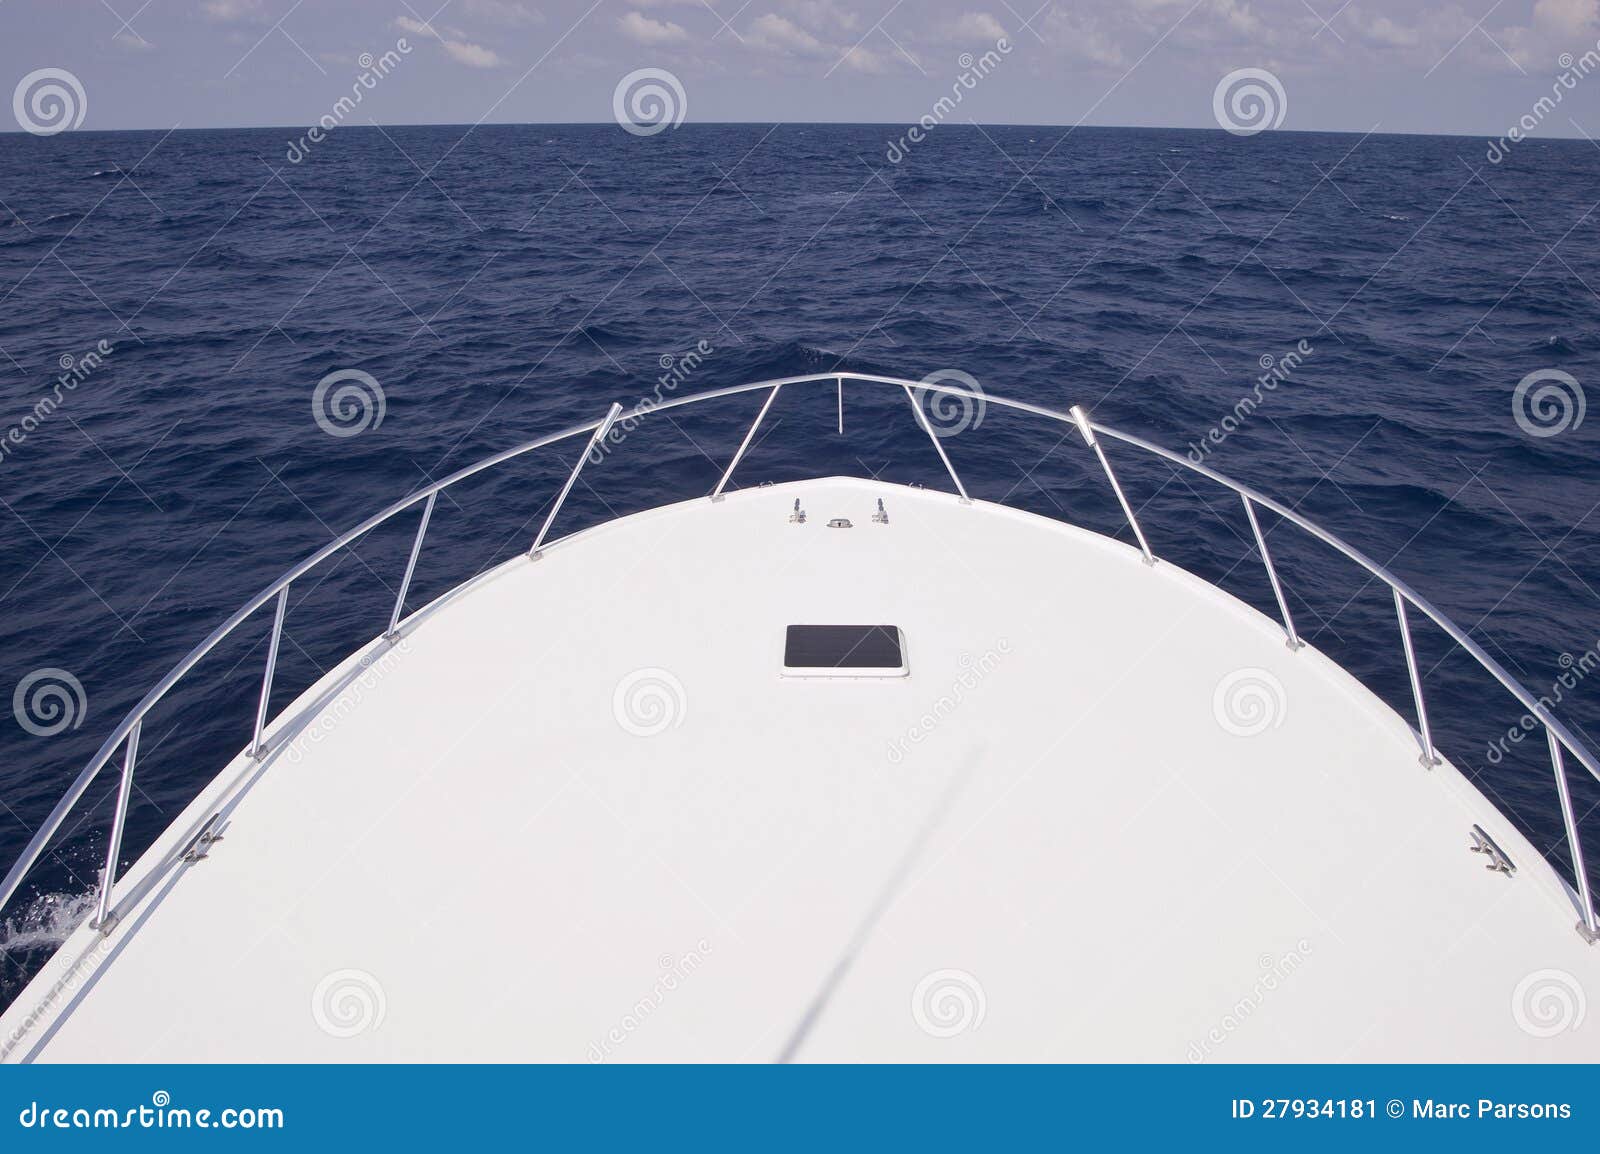 Bow Of Charter Fishing Boat Stock Image - Image: 27934181